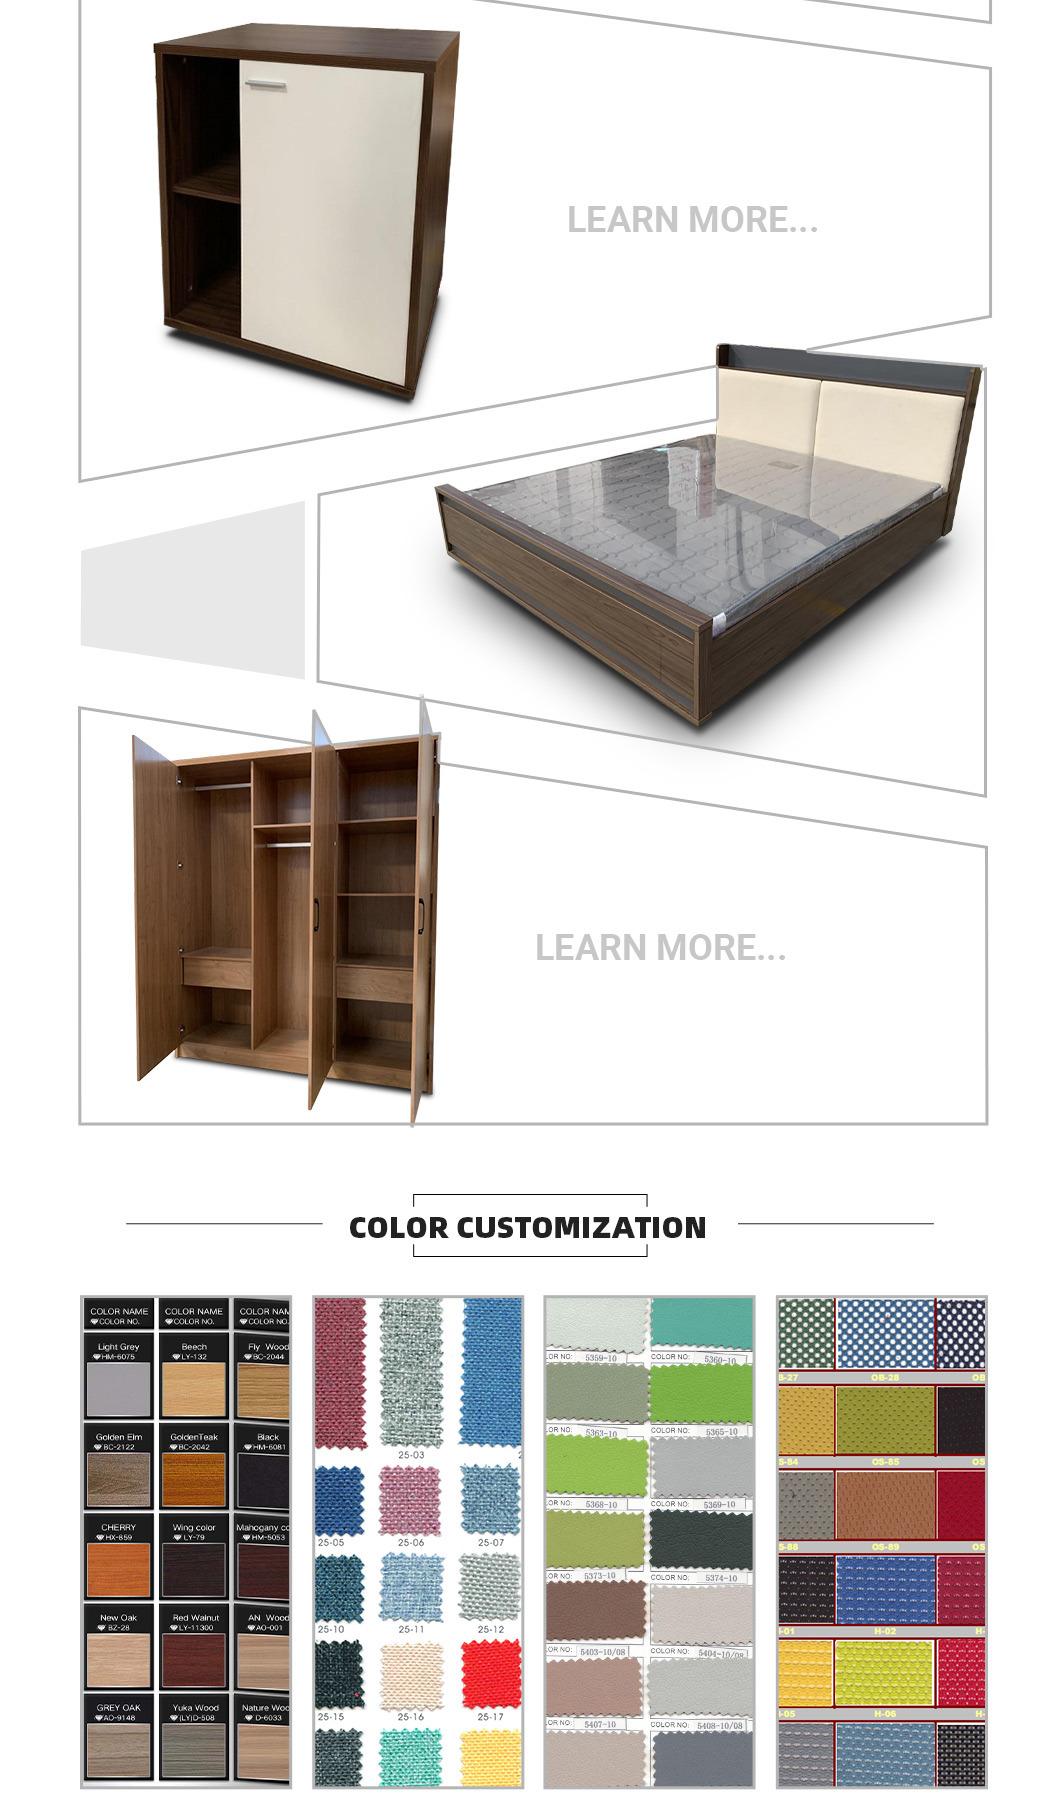 Modern Executive Style Storage Multi-Function PU Leather Bedroom Hotel Furniture Wooden Beds